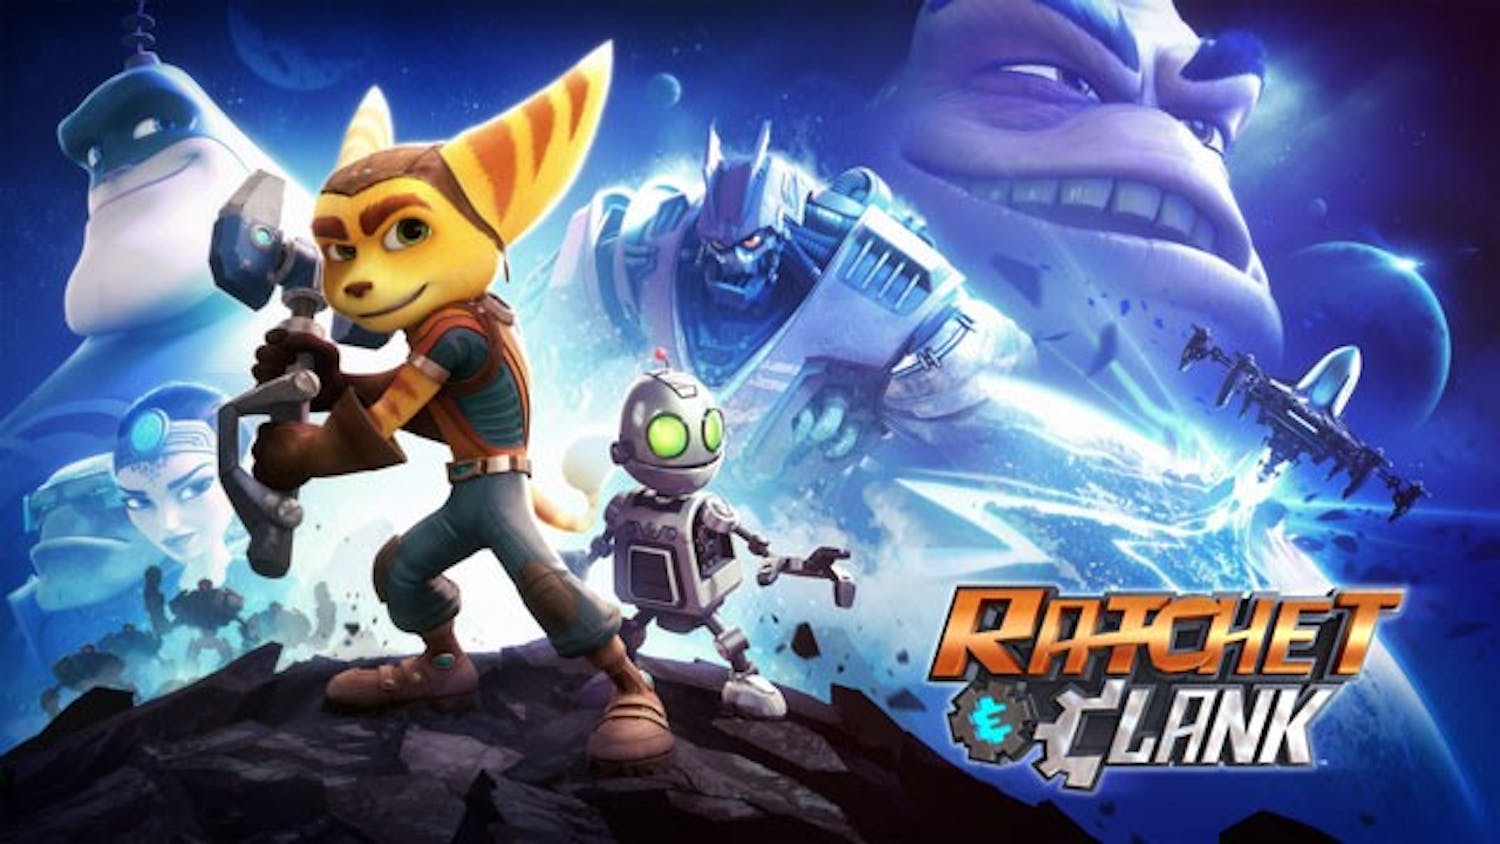 The PS4 update of "Ratchet and Clank" is a joyride that keeps the charm of the old game, while still providing a fresh gaming&nbsp;experience for PS4 owners.